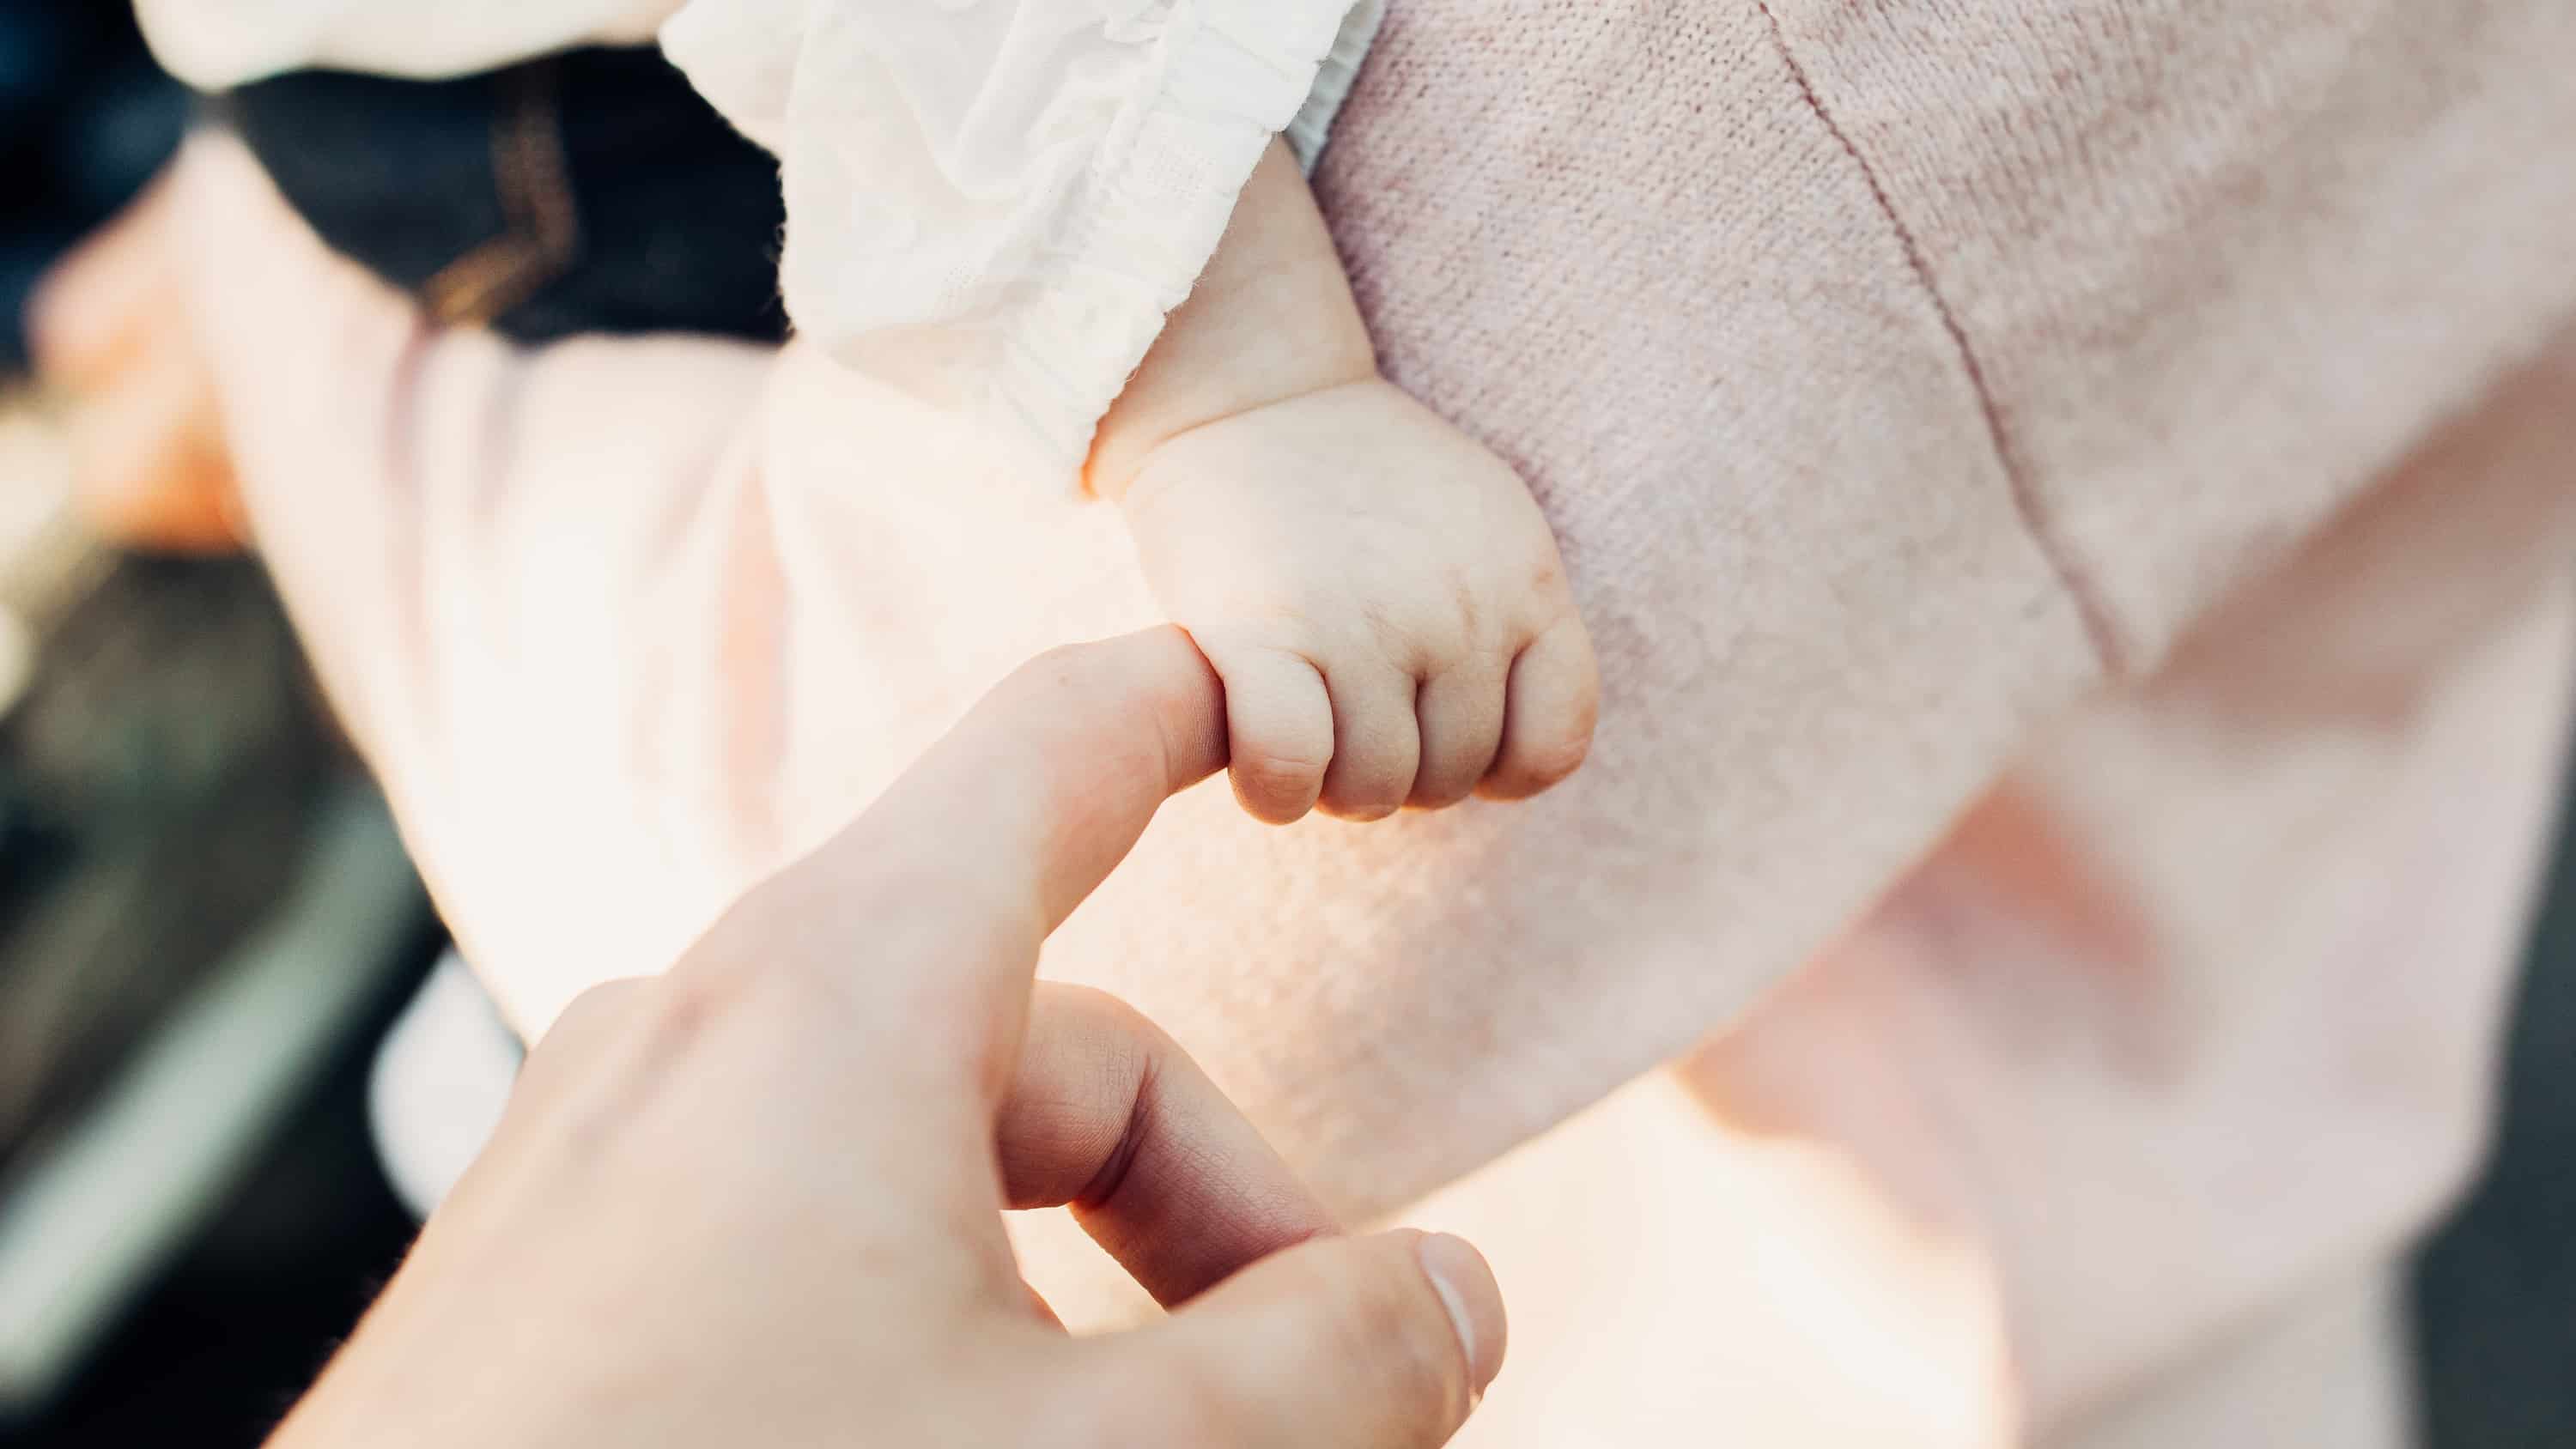 A man's fingers is grasped by the tiny hand of a baby.